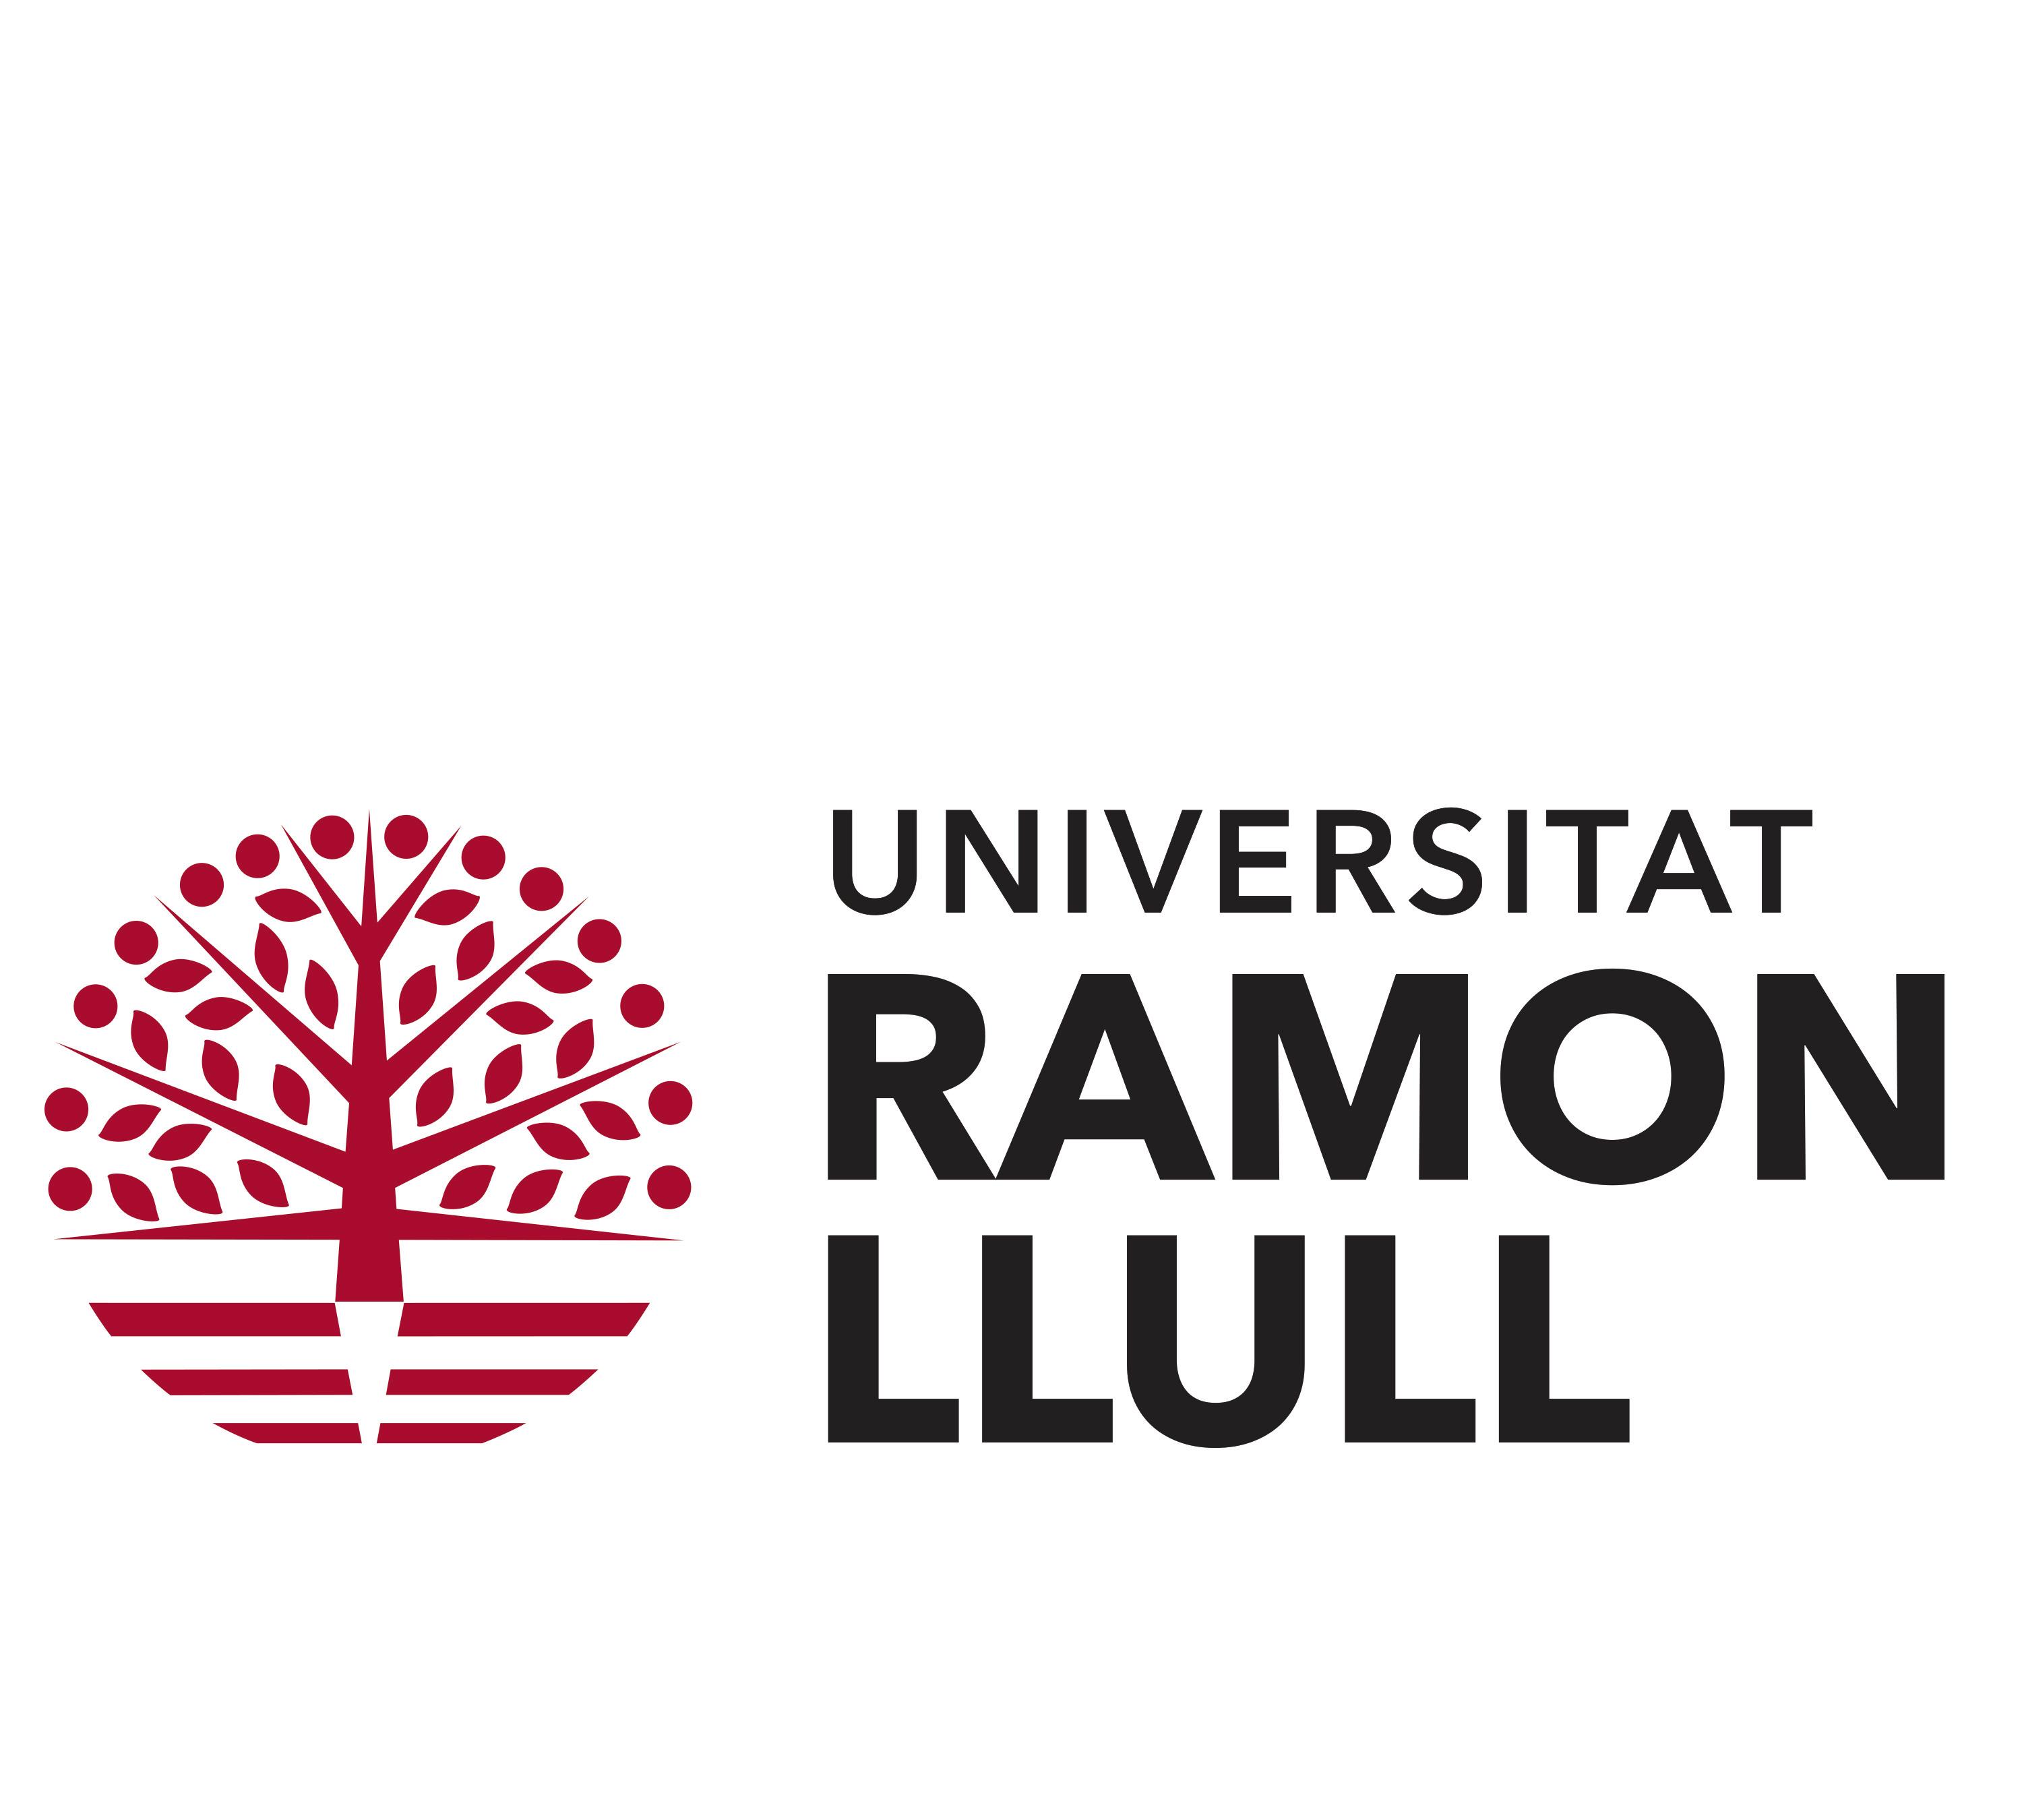 Letter from the rector of the URL to the entire university community